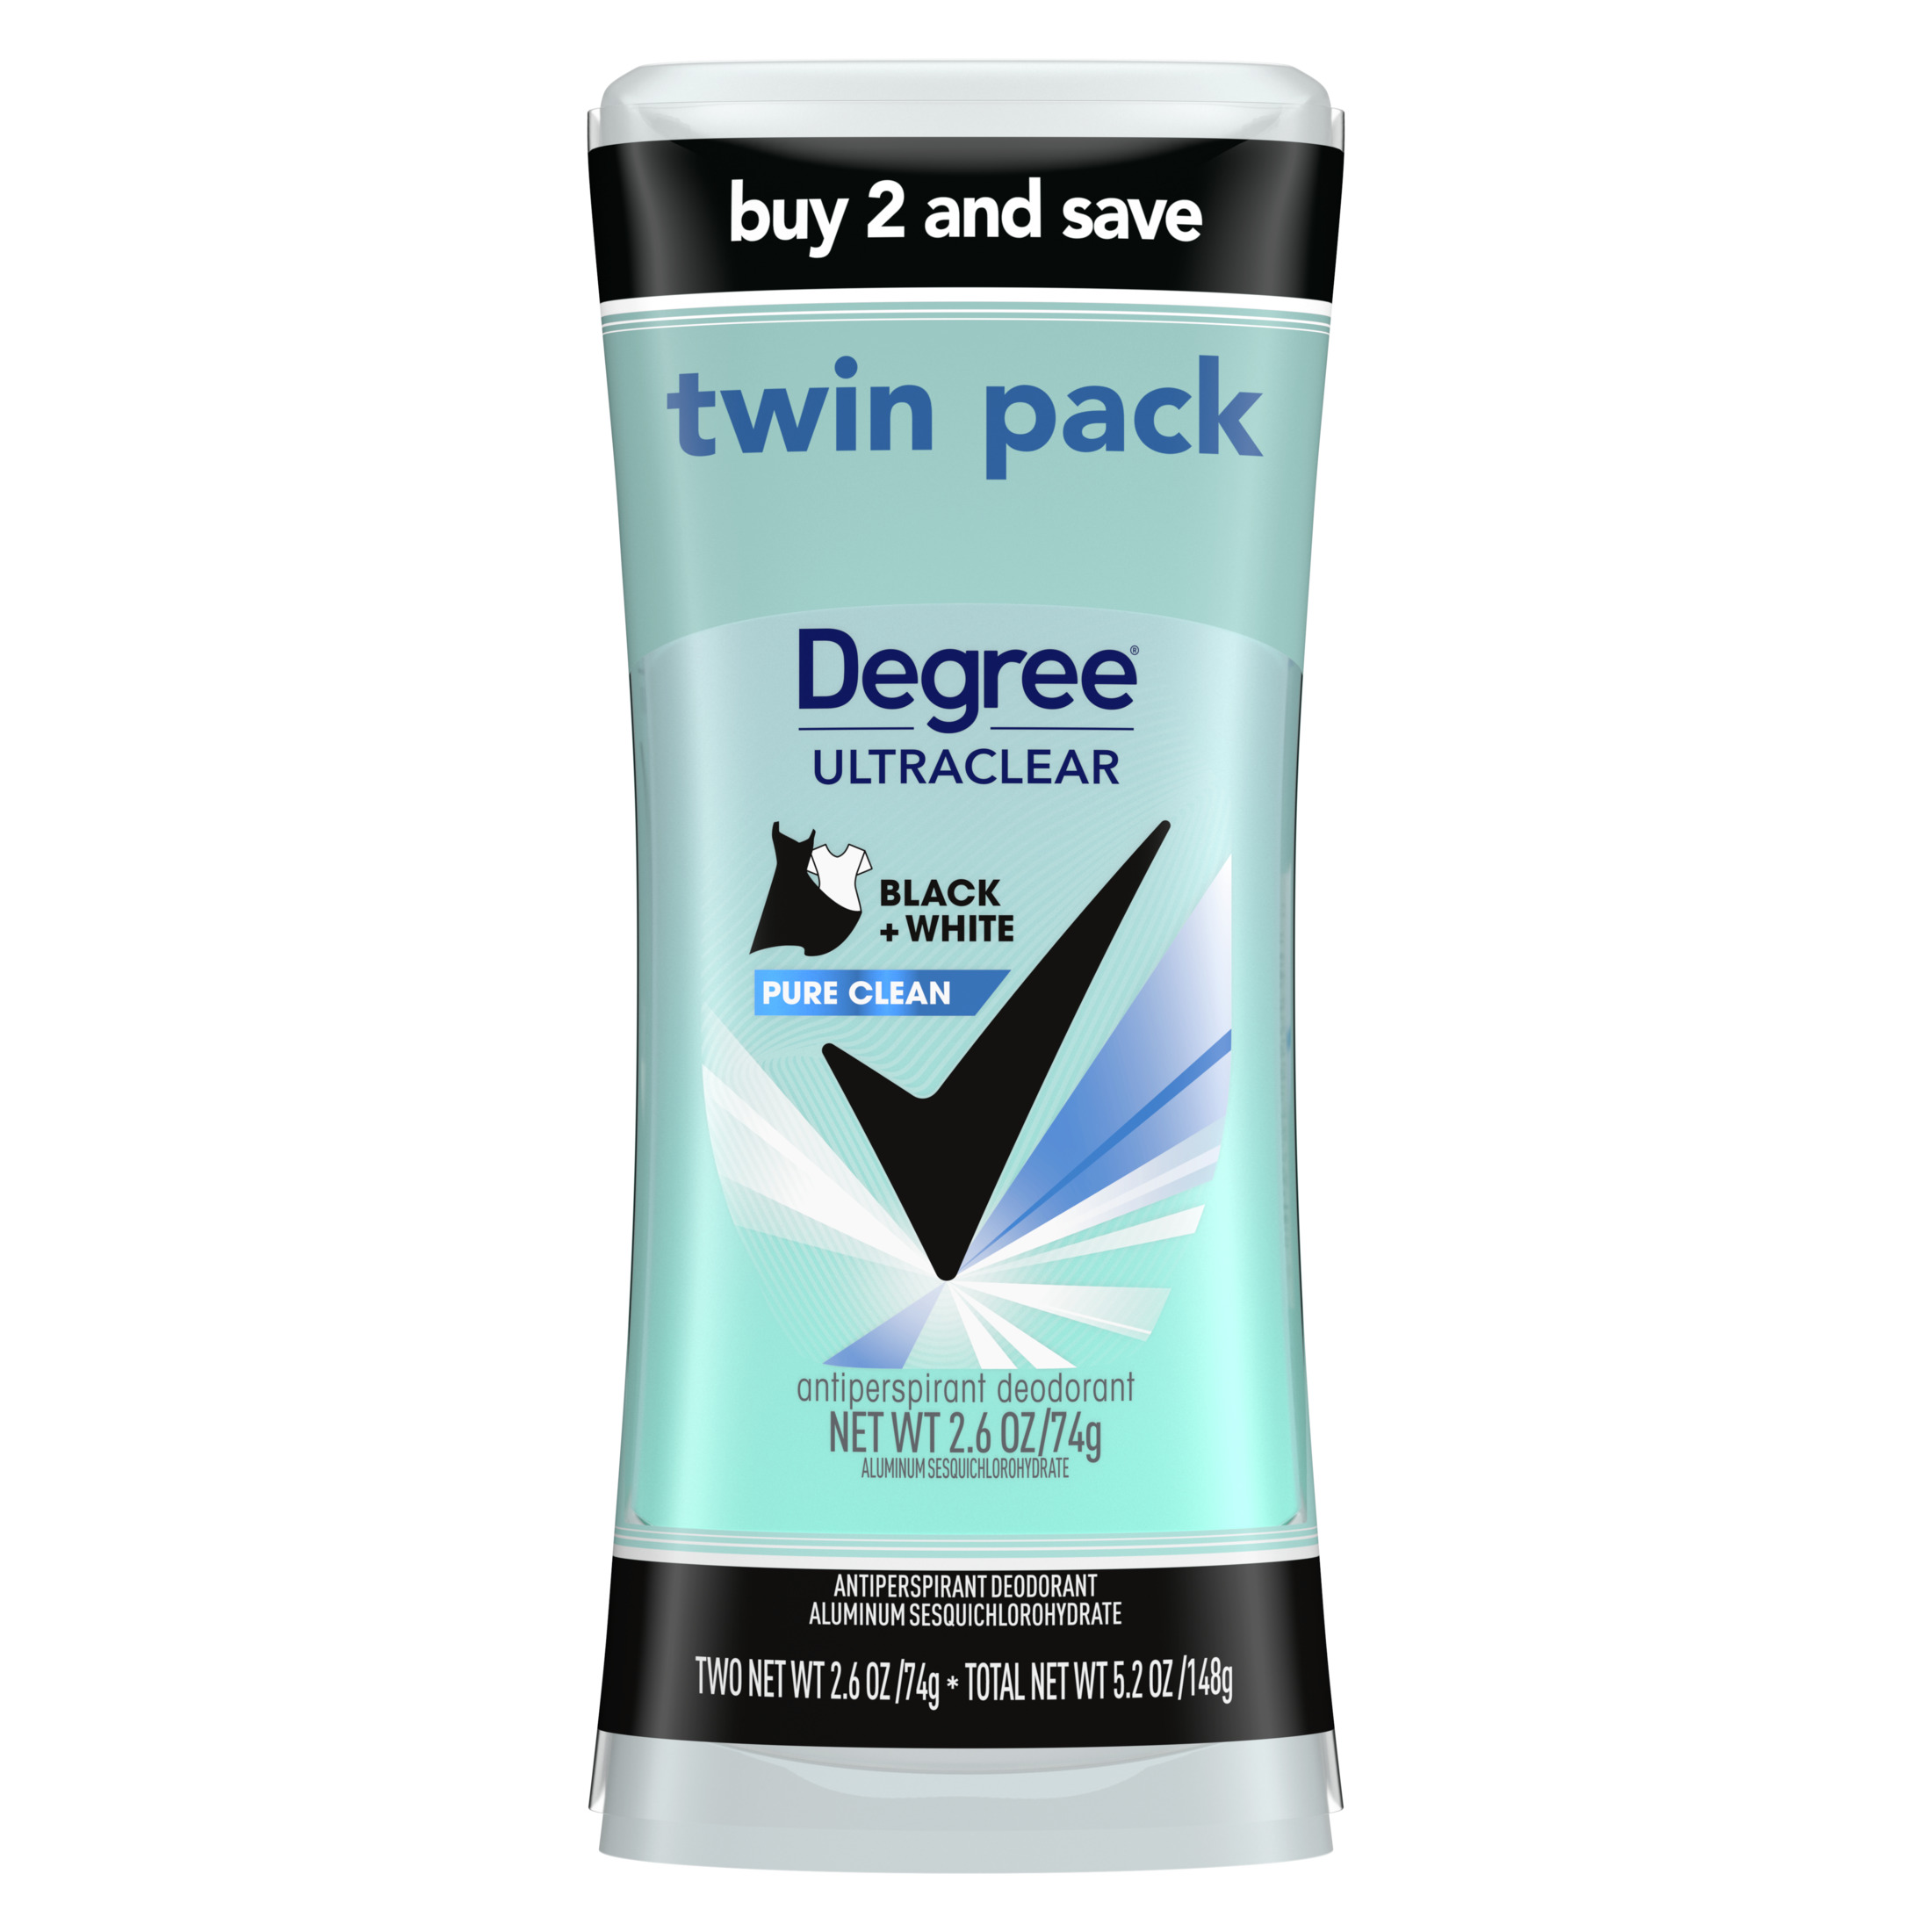 Degree Ultra Clear Long Lasting Women's Antiperspirant Deodorant Stick Twin Pack, Pure Clean, 2.6 oz - image 1 of 11